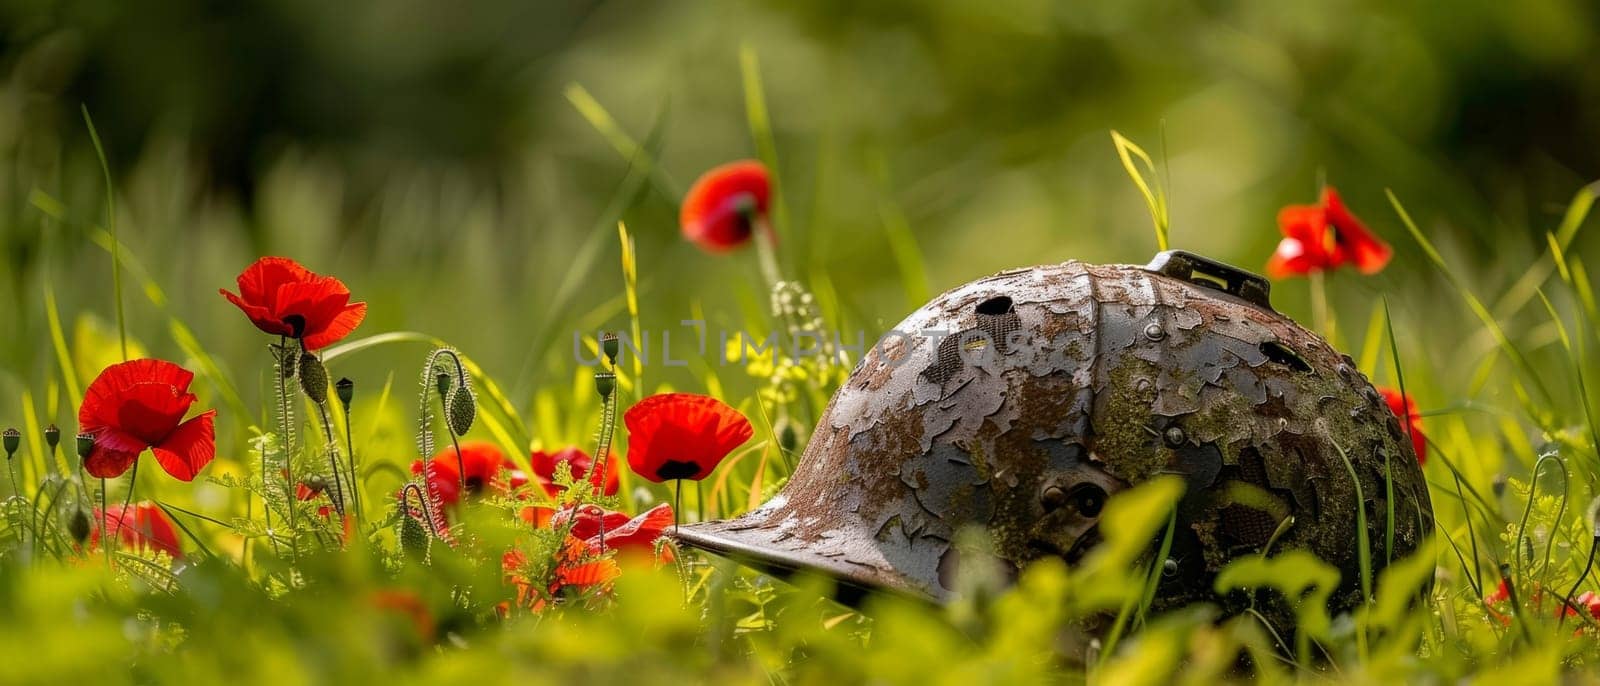 A battered military helmet rests amidst a sea of vibrant red poppies, a poignant juxtaposition of the harsh realities of war and the resilience of nature's beauty. by sfinks